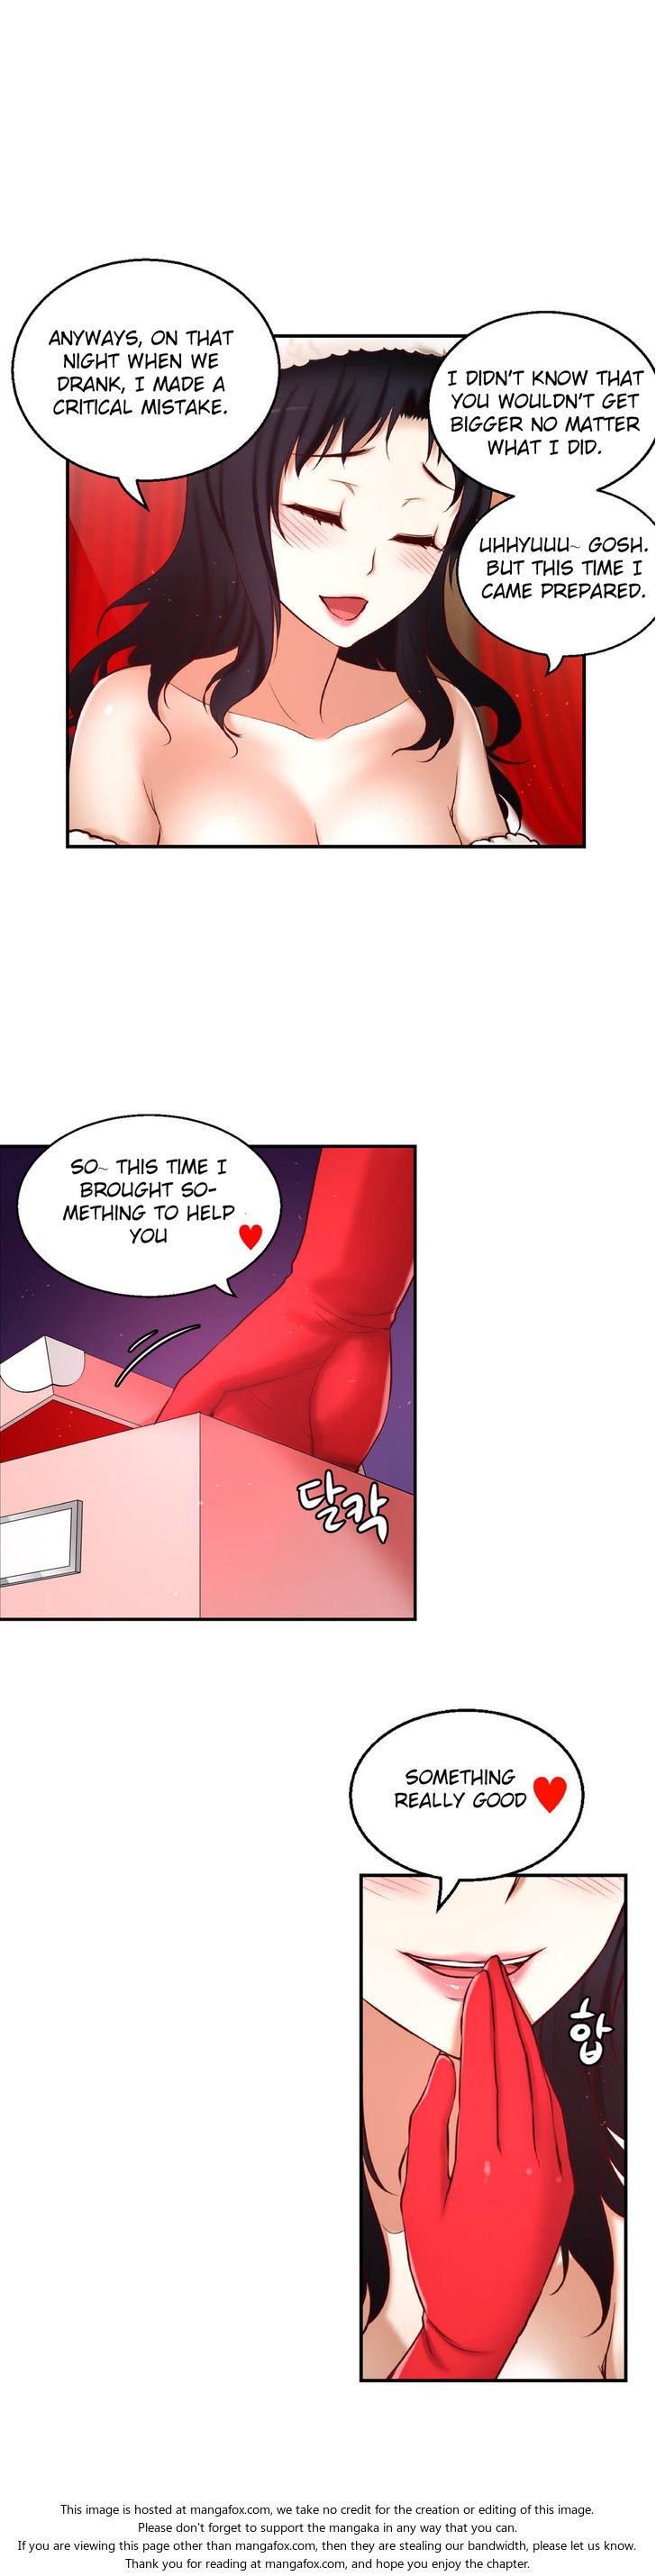 [Donggul Gom] She is Young (English) Part 1/2 1716